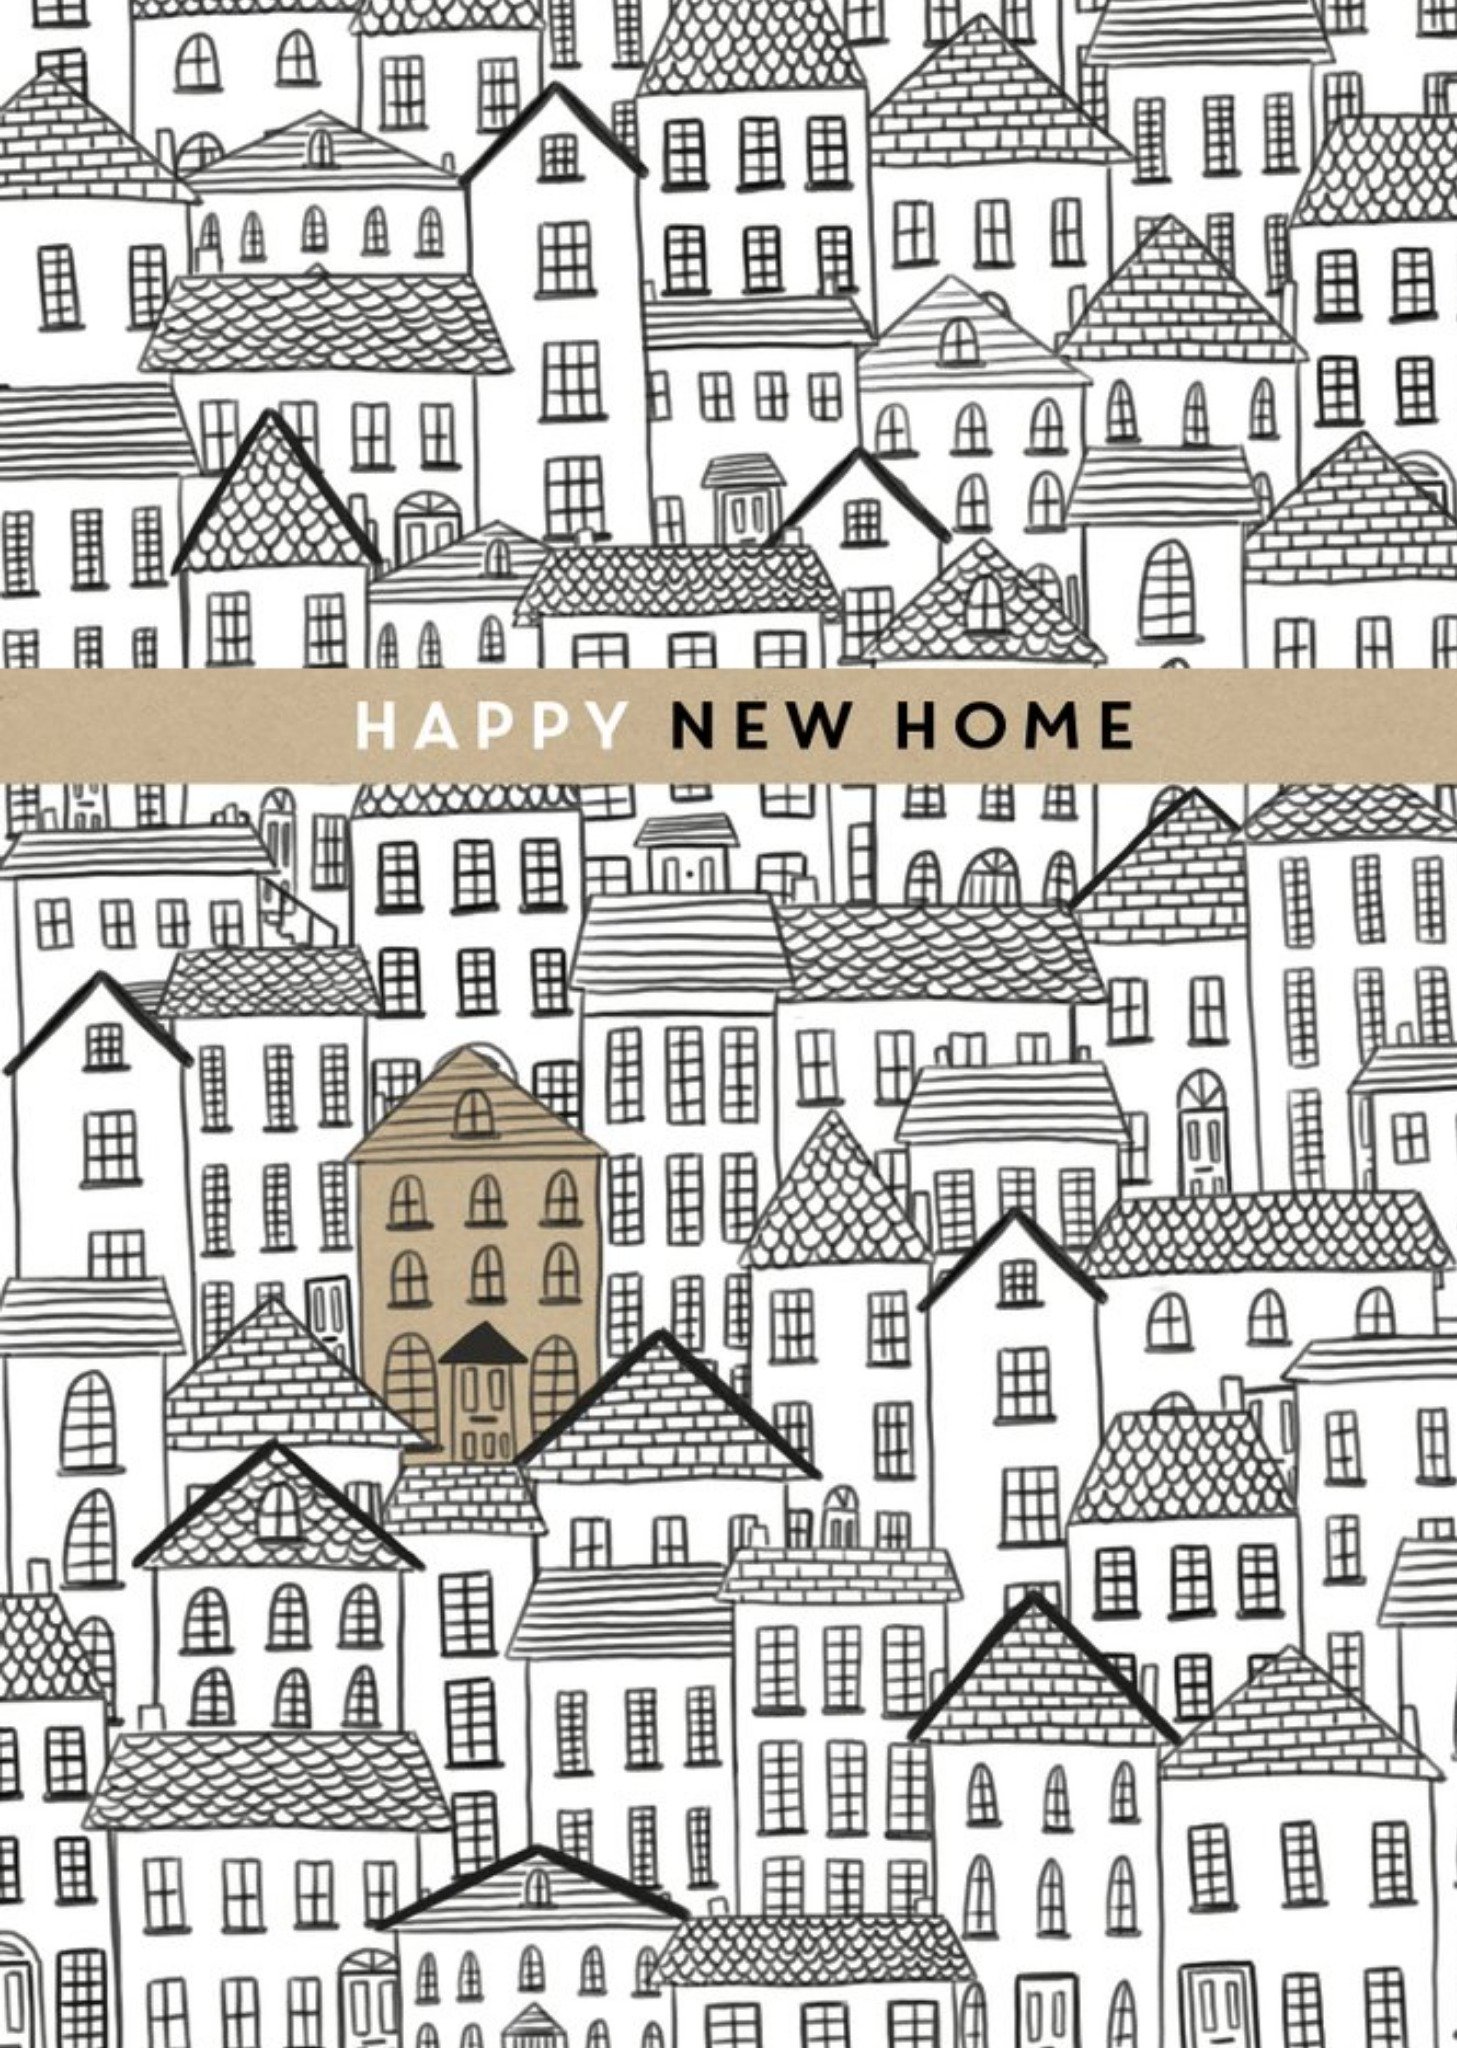 Moonpig New Home Card - Happy New Home - Houses - Illustration Ecard